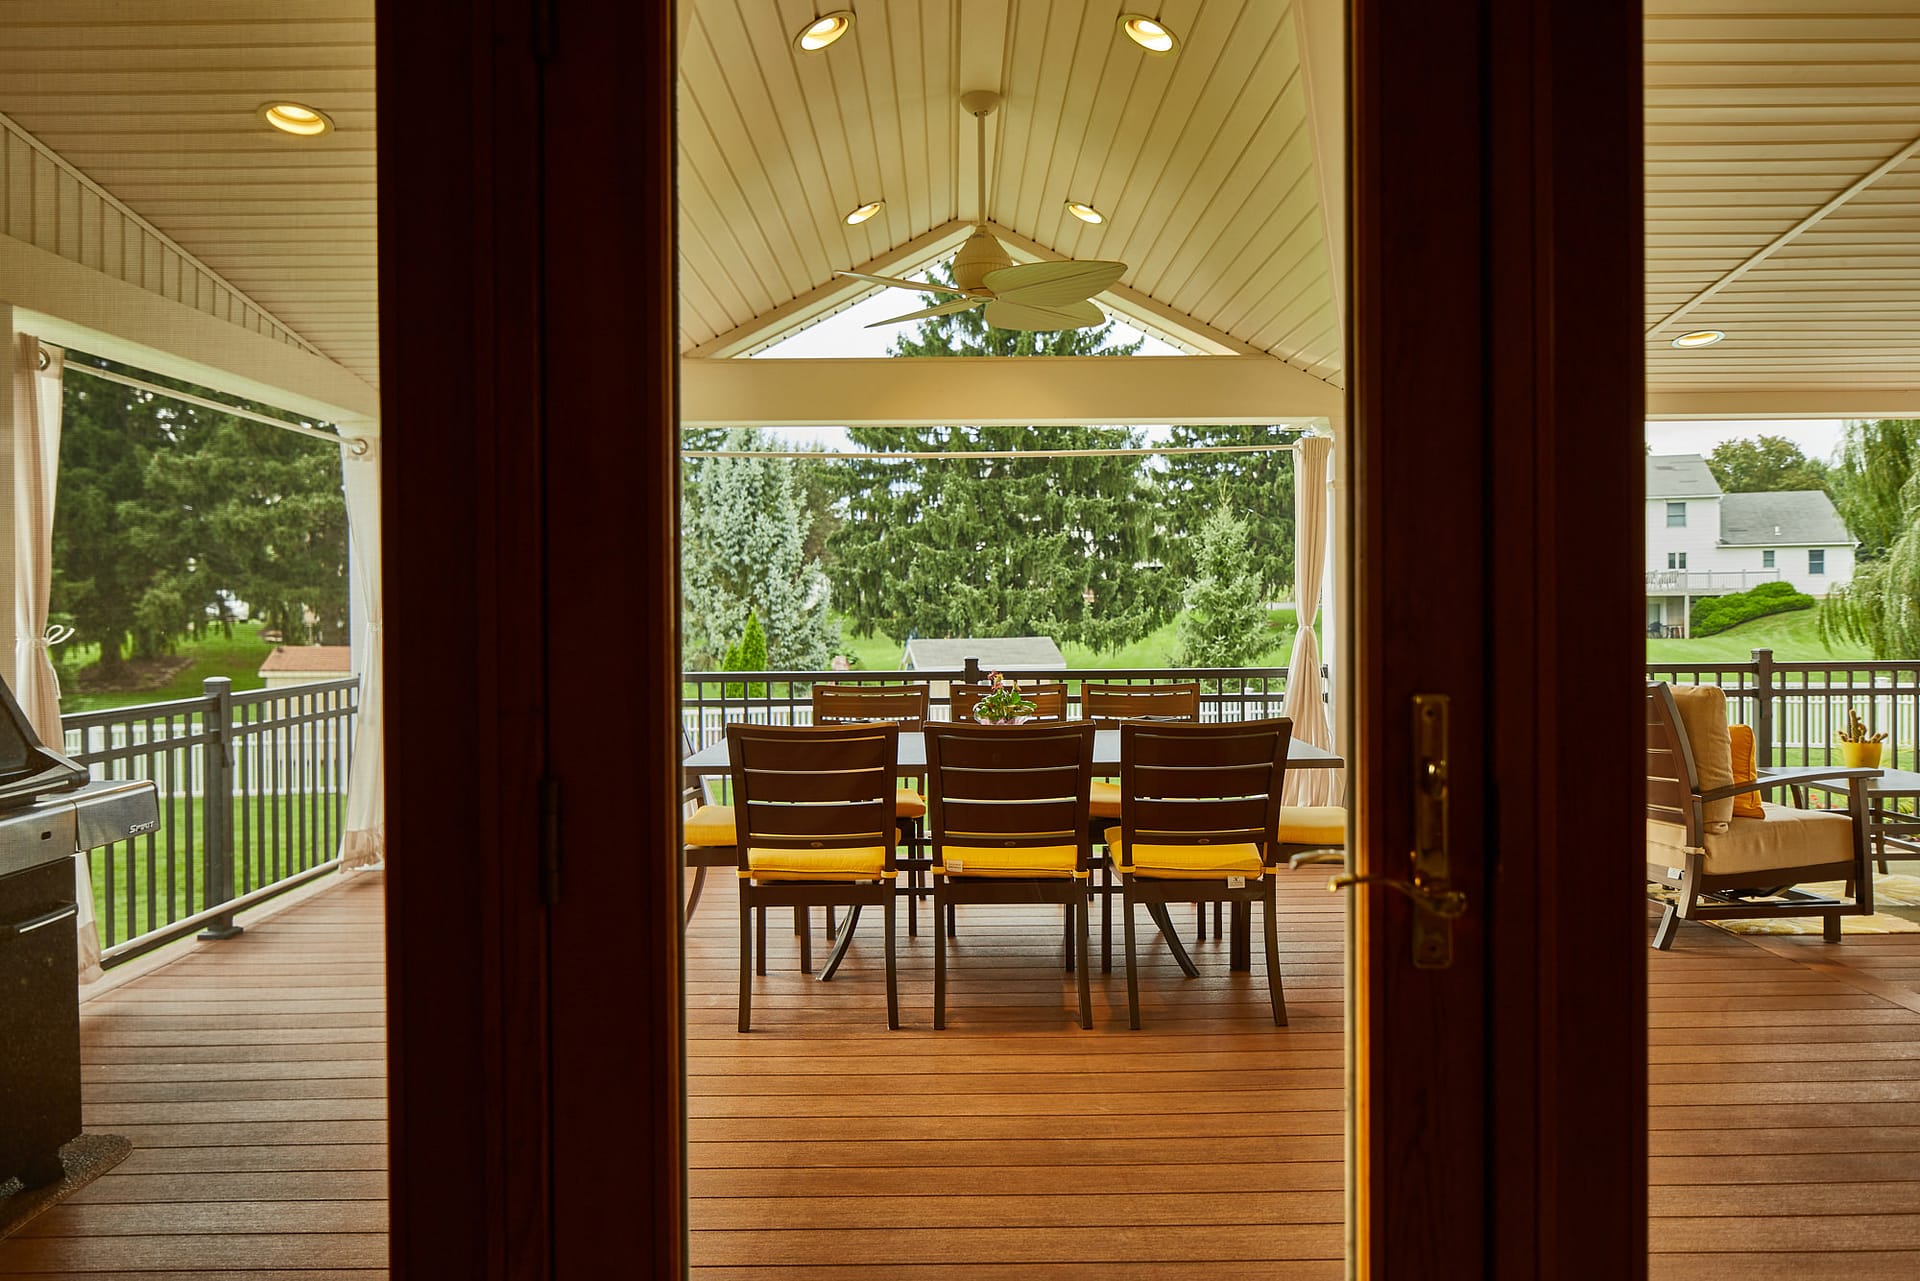 Open the living room patio doors to the flush deck space that has all 3 destination zones: cooking, dining and lounging! This seamless transition creates an expanded living space that is beautiful and also functional.